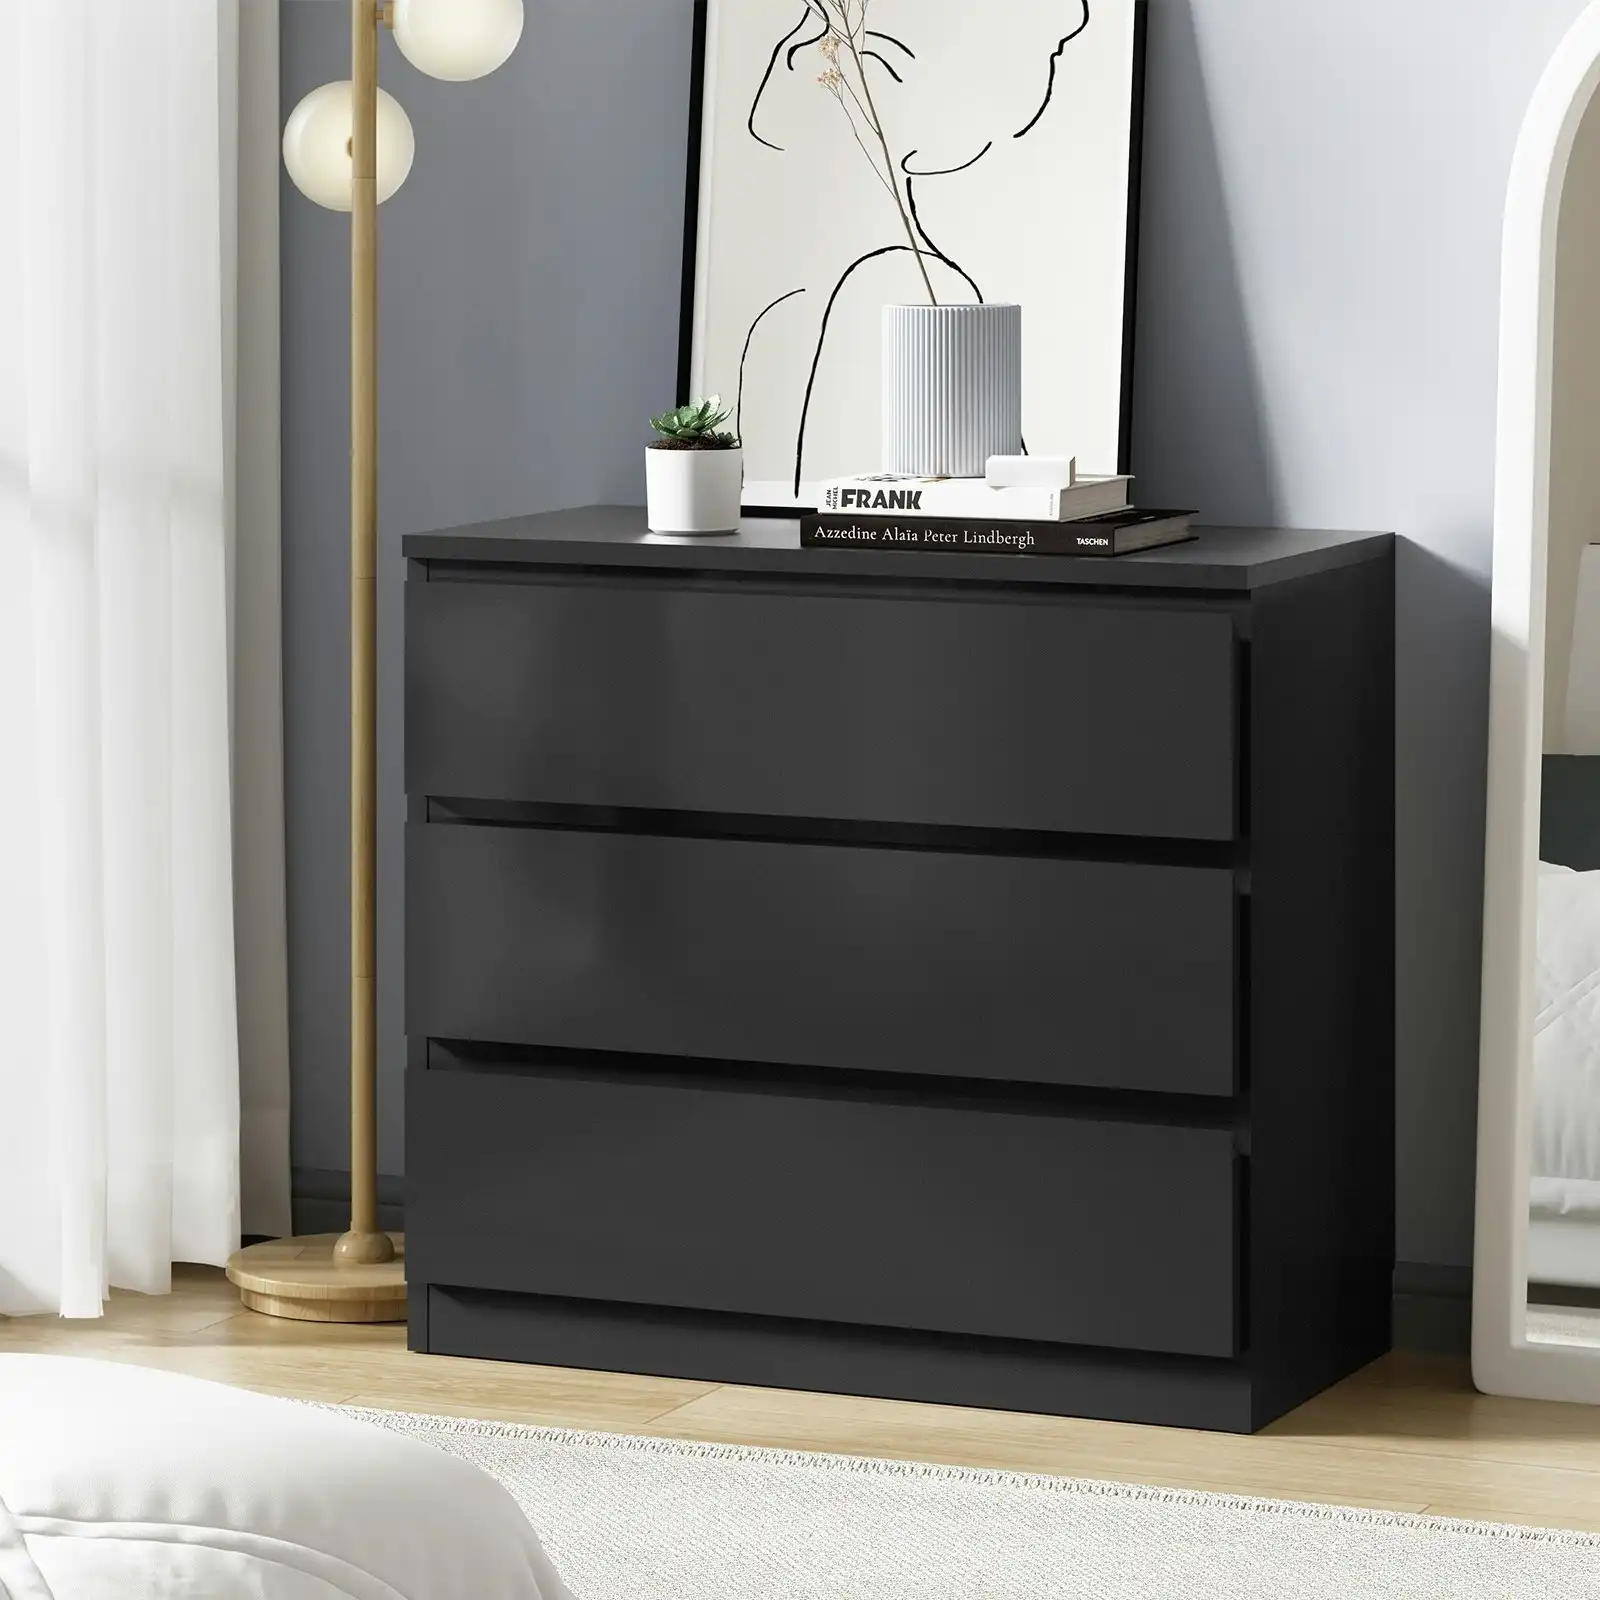 Oikiture 3 Chest of Drawers Lowboy Dresser Table Storage Cabinet Bedroom Black